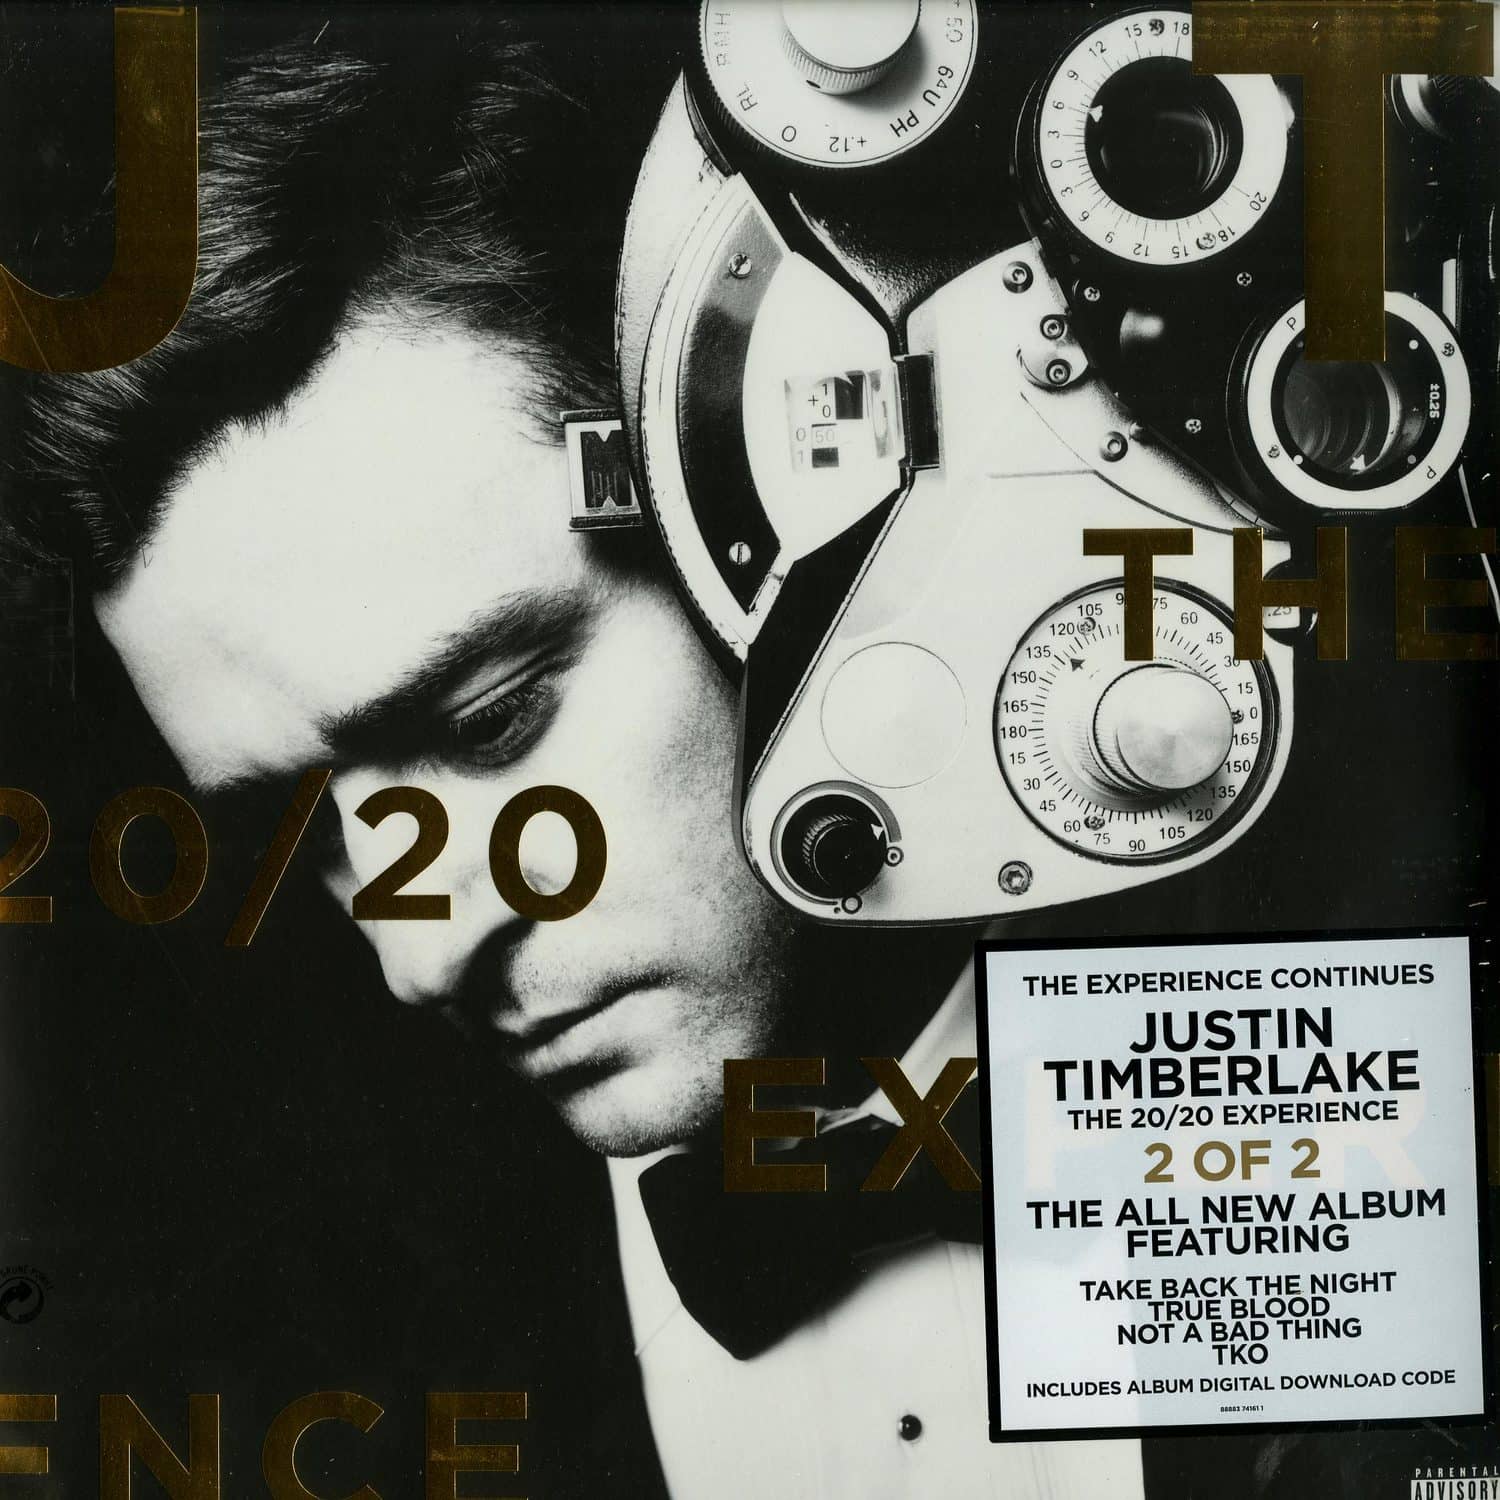 Justin Timberlake - THE 20/20 EXPERIENCE 2 OF 2 